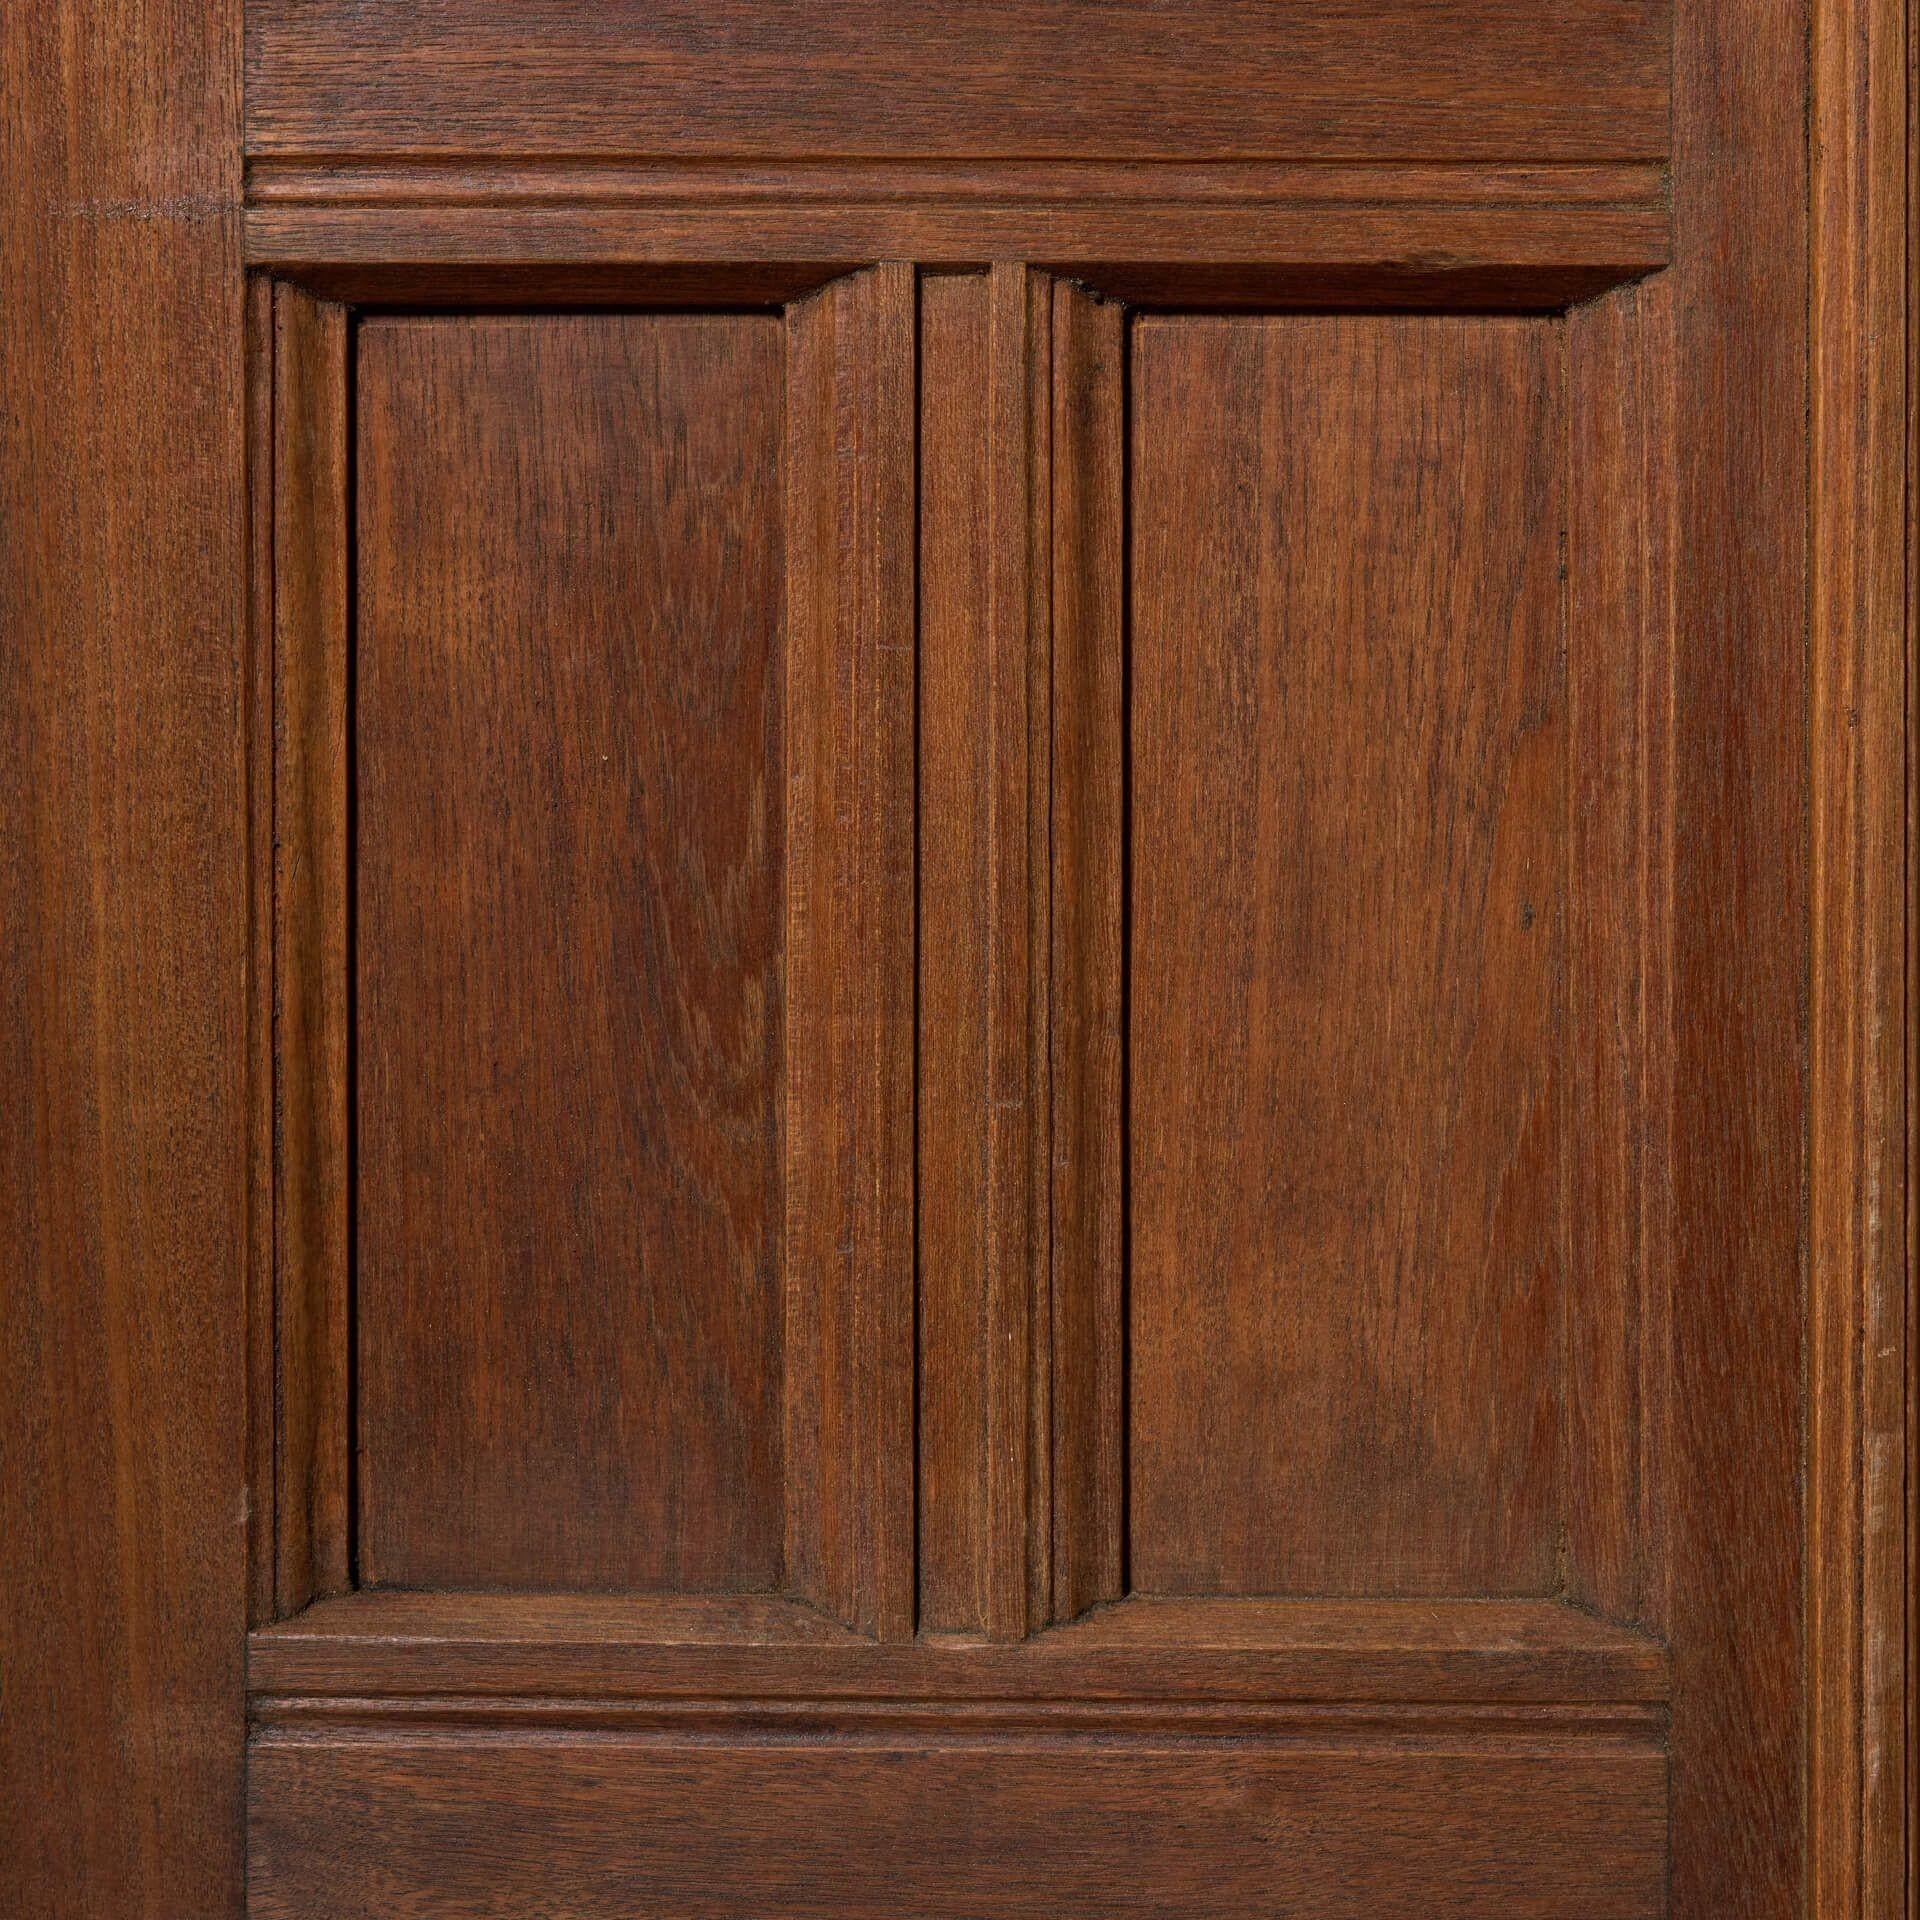 Set of Tall Edwardian Teak Glazed Doors In Fair Condition For Sale In Wormelow, Herefordshire